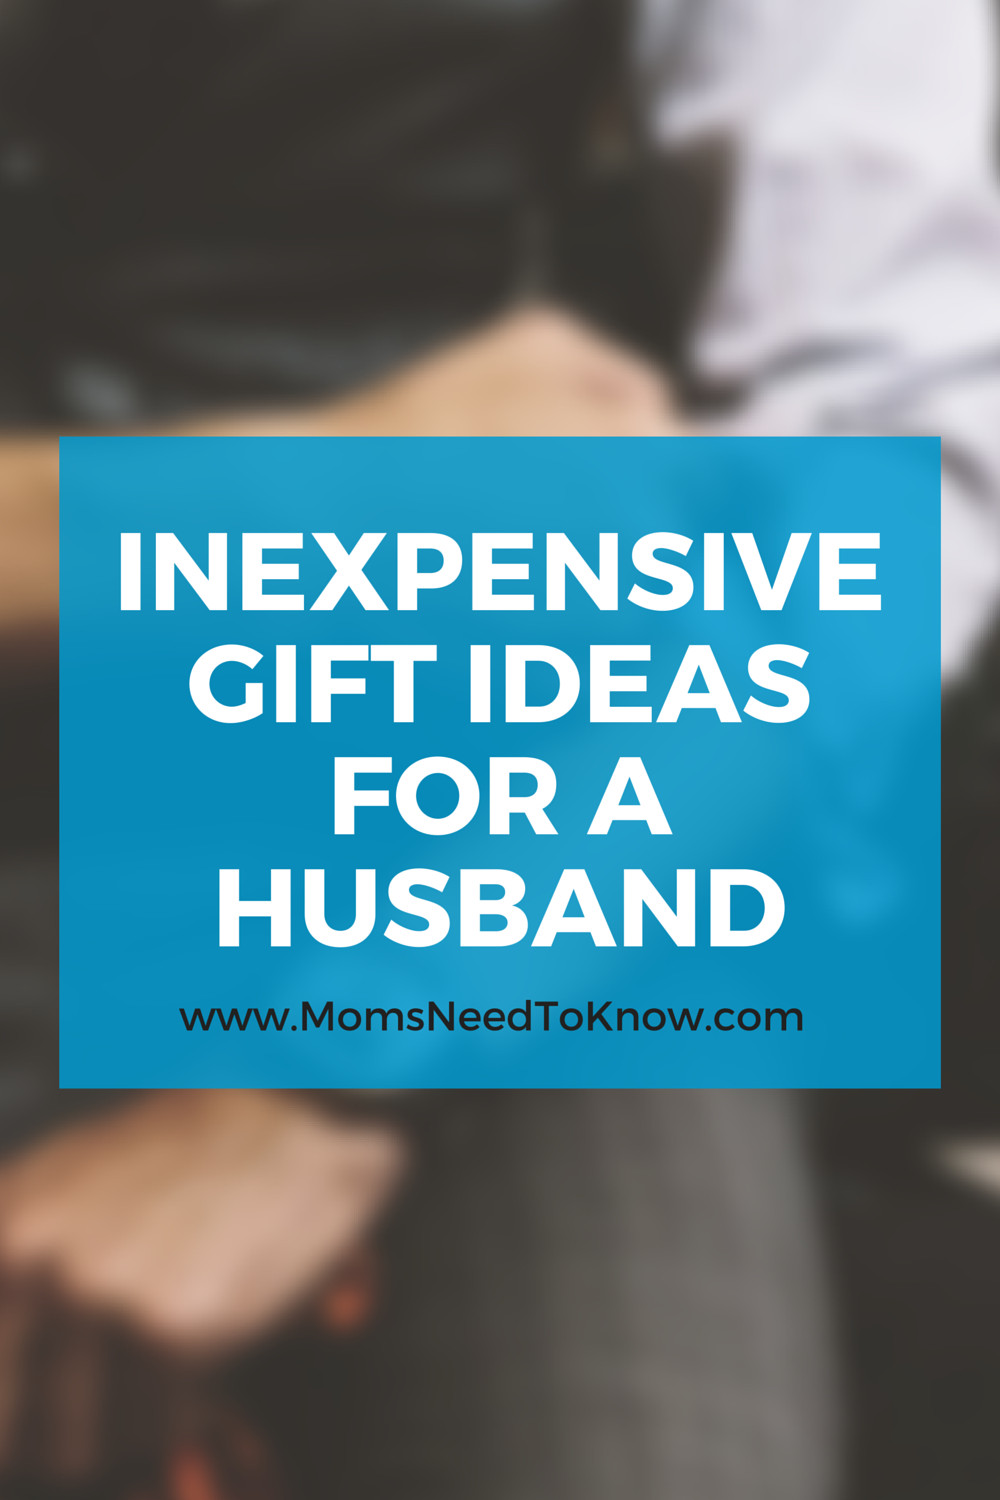 Holiday Gift Ideas For Husband
 Inexpensive Gift Ideas For Your Husband